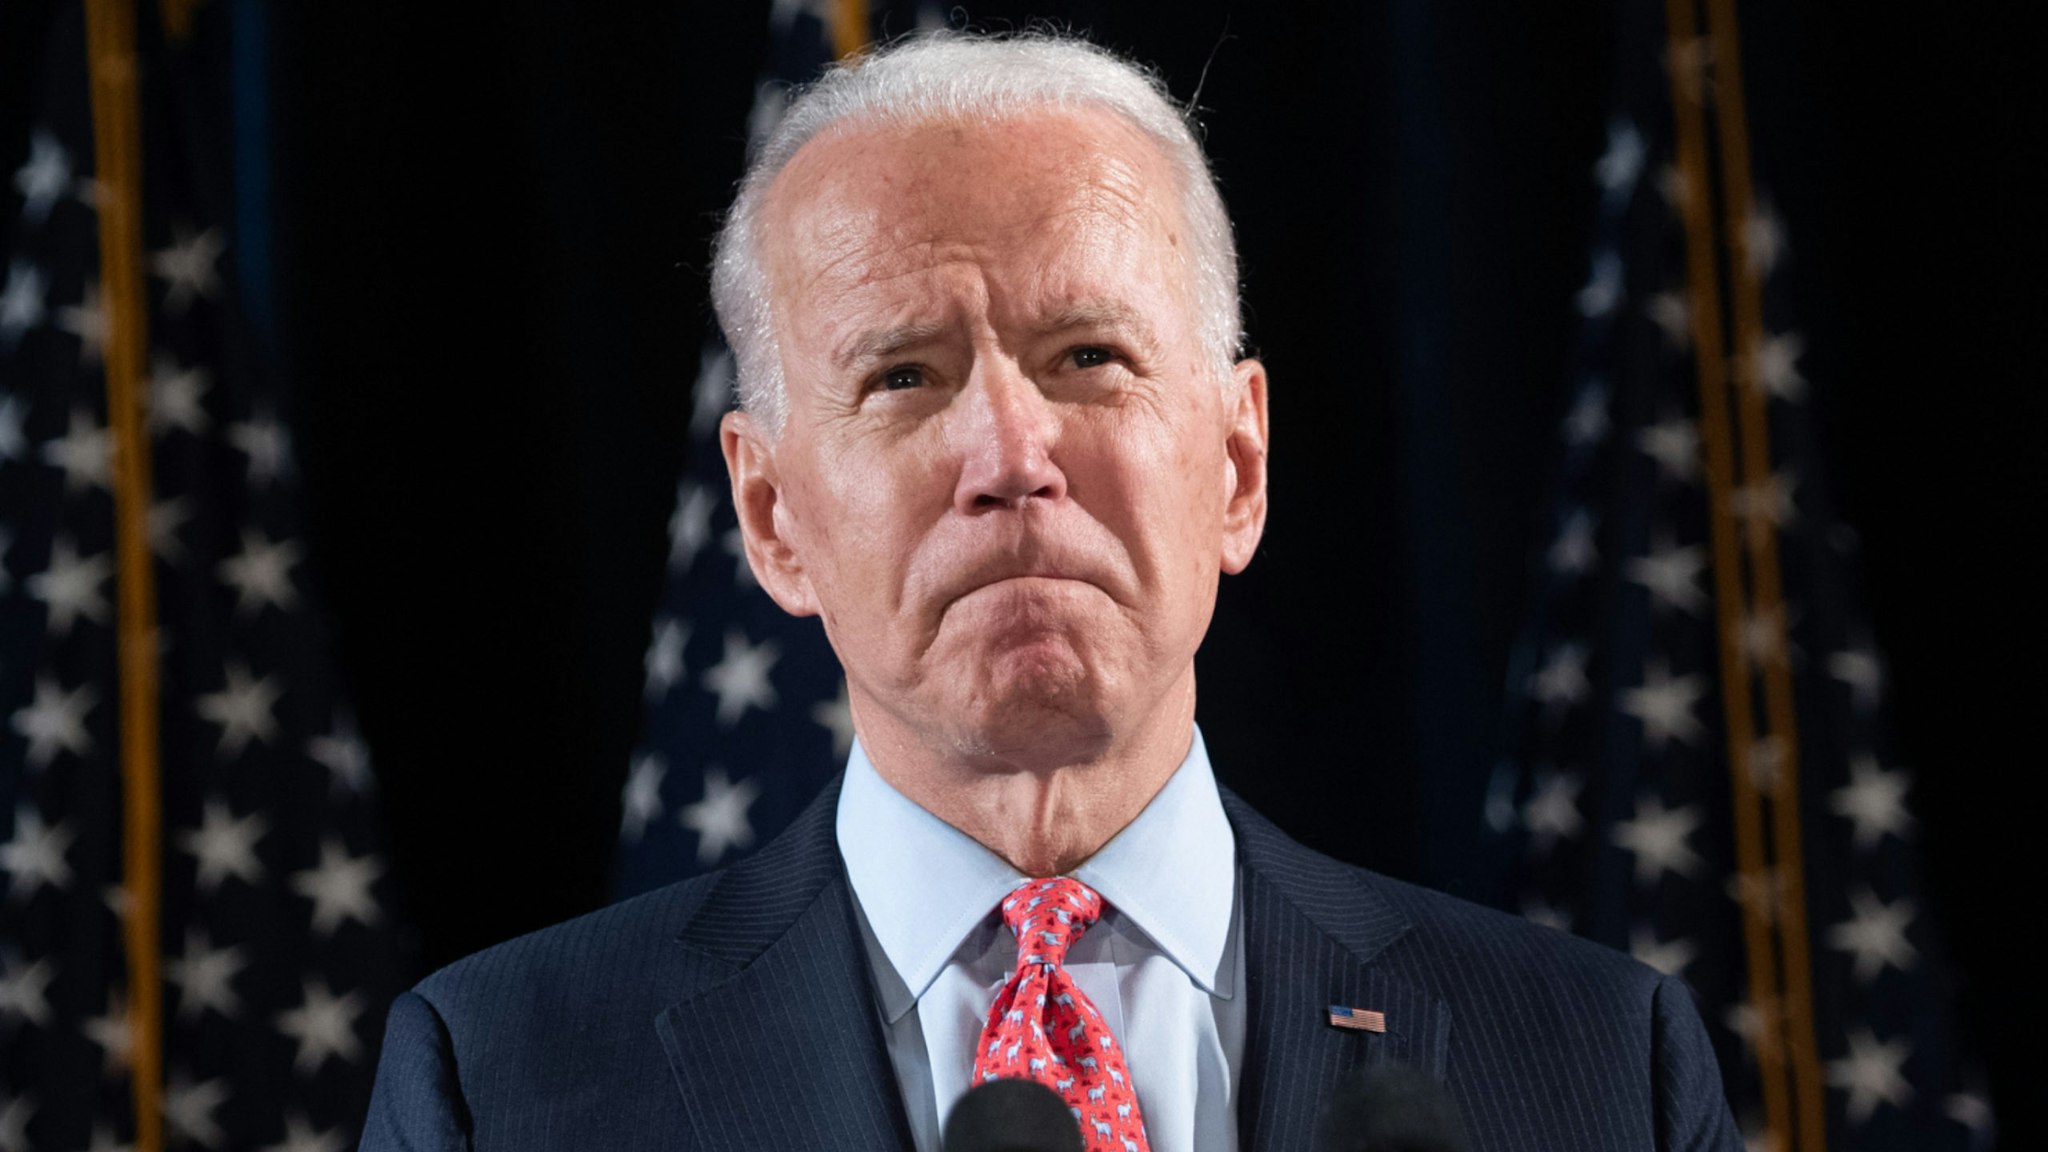 Former US Vice President and Democratic presidential hopeful Joe Biden speaks about COVID-19, known as the Coronavirus, during a press event in Wilmington, Delaware on March 12, 2020.